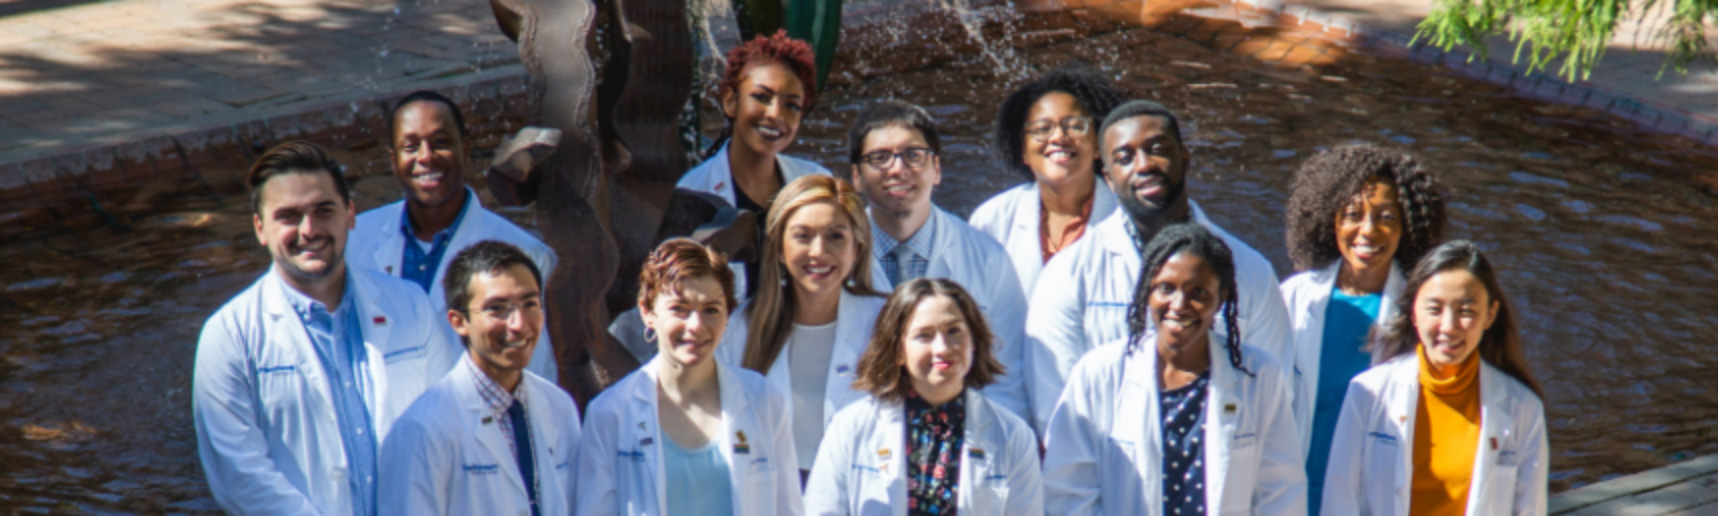 A group of diverse medical students standing in front of a tree